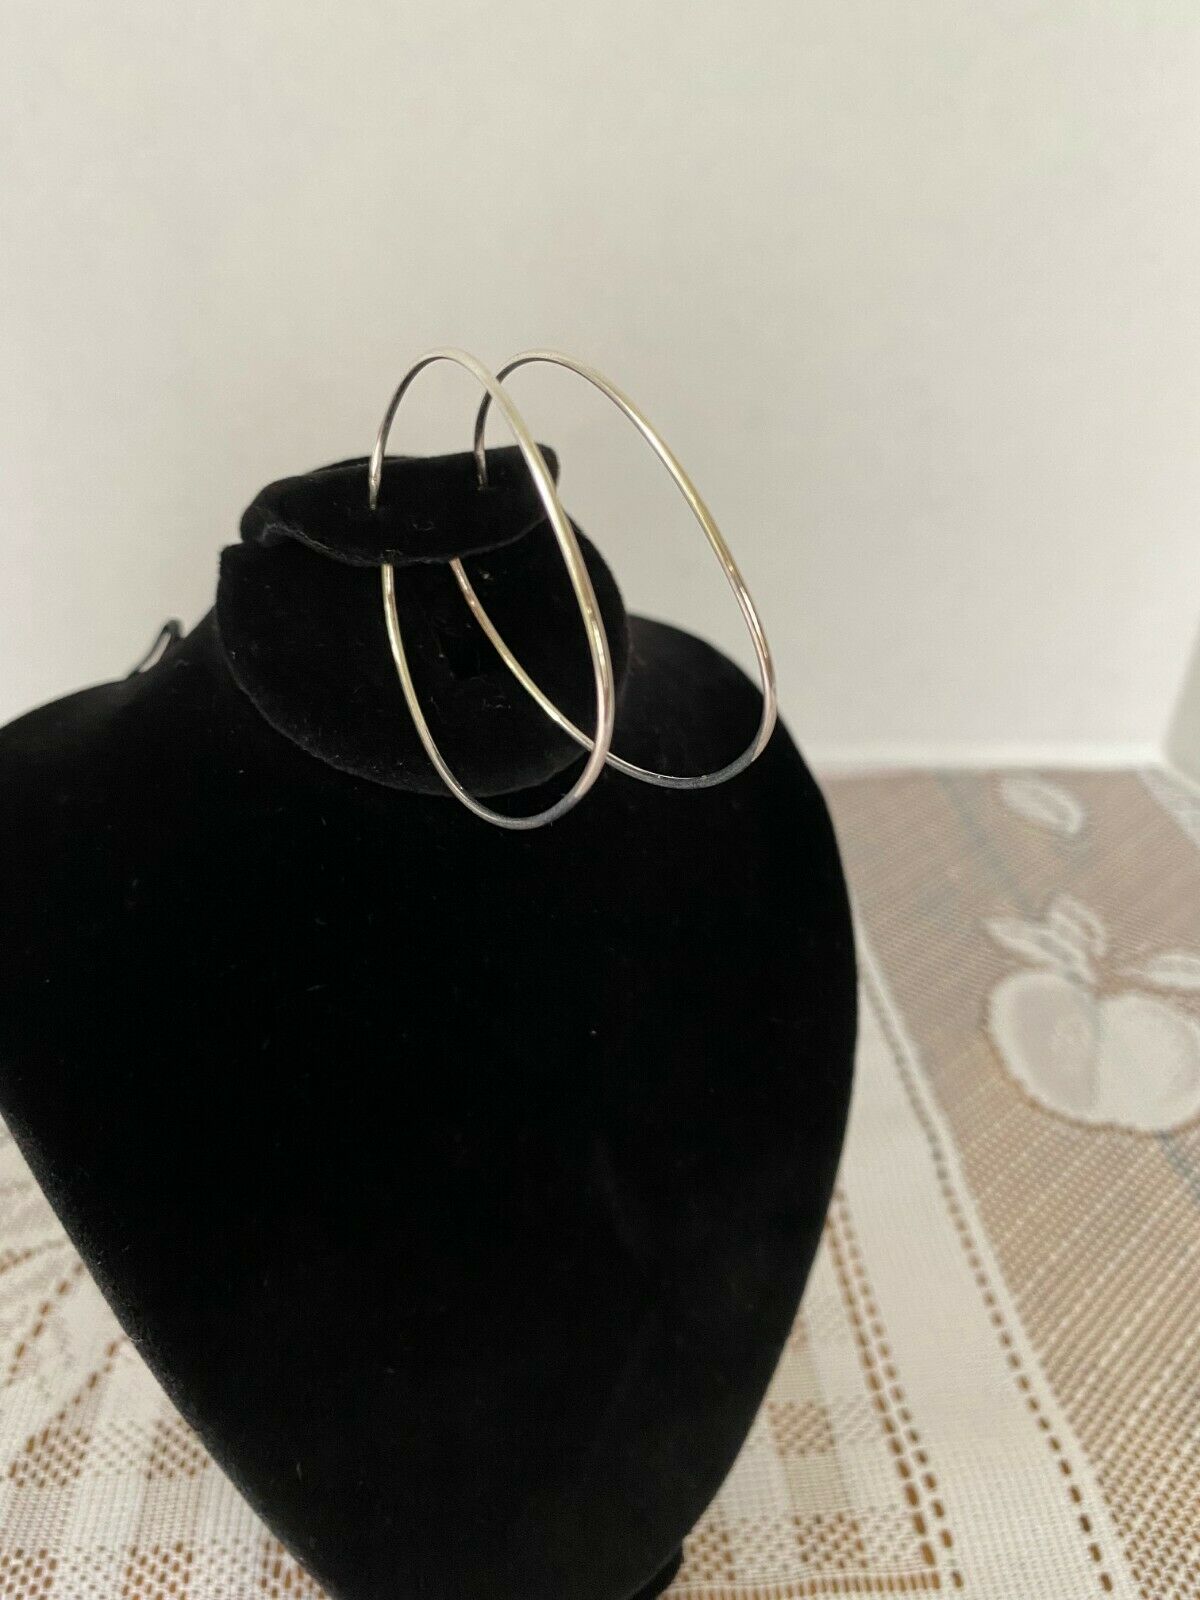 Thin But Larger Scale Sterling Silver Dyadema Italy Hoop Earrings